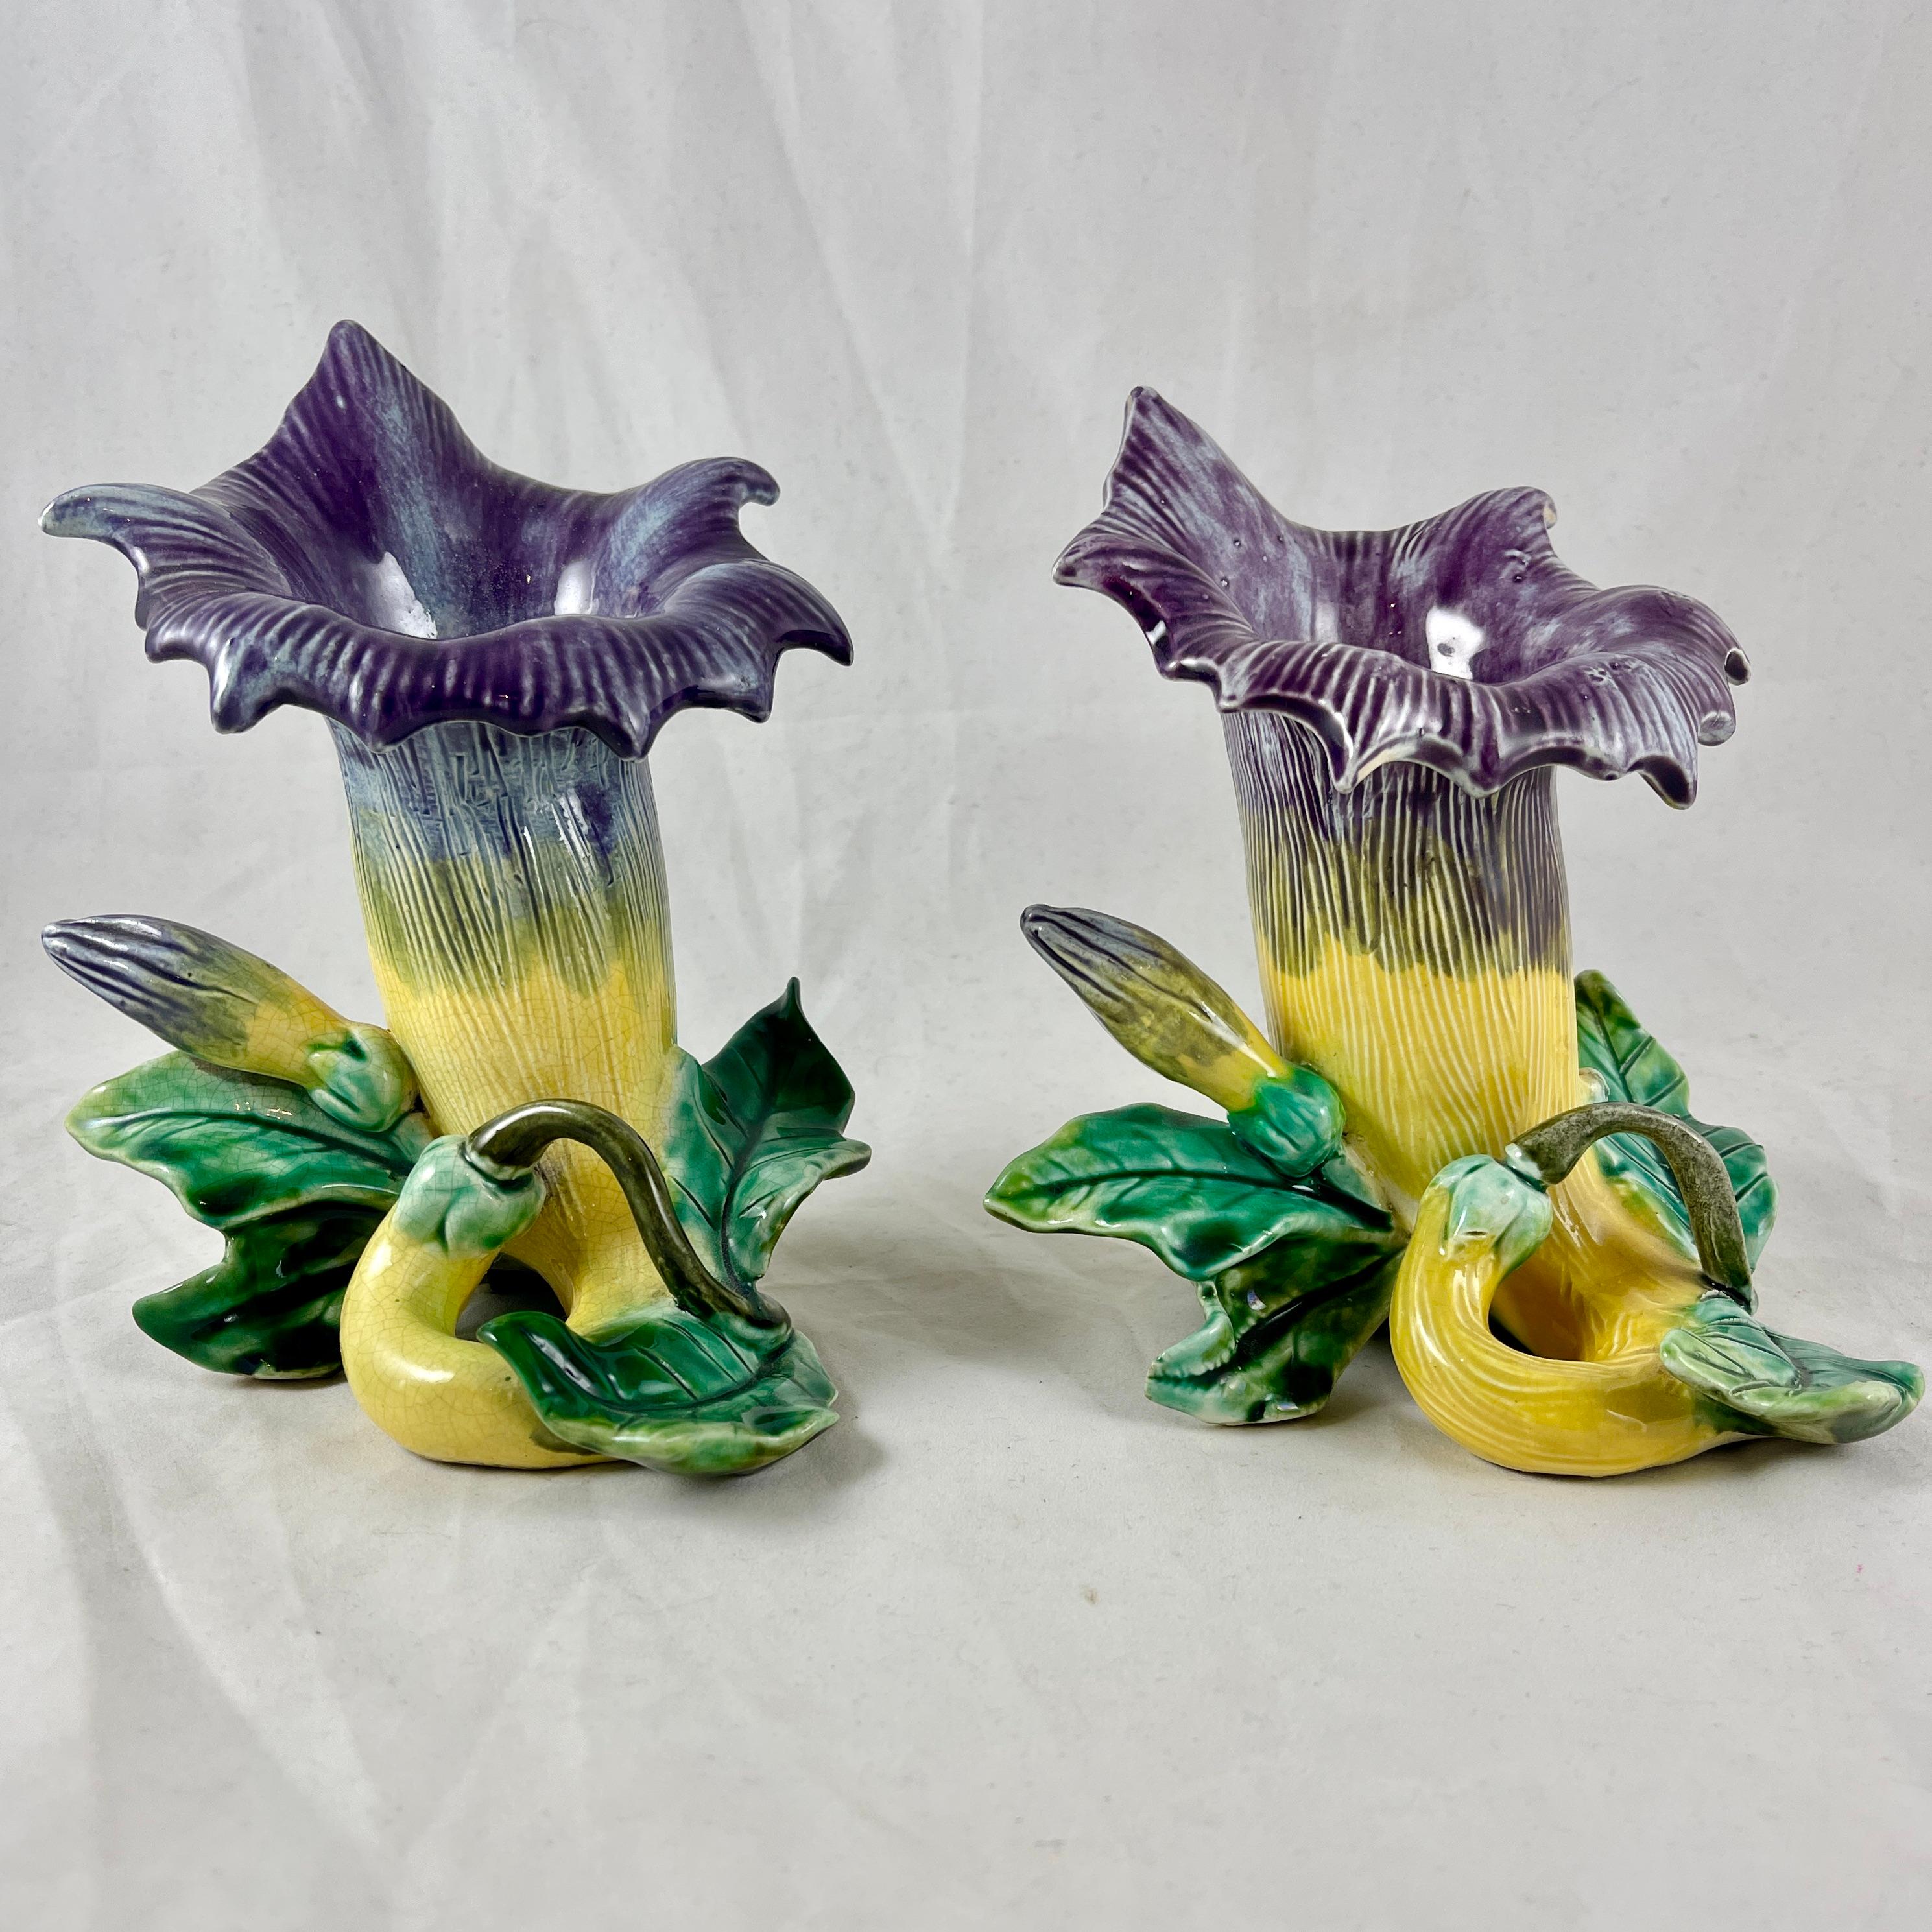 From the French faiencerie Five-Lille de Bruyn, a pair of Art Nouveau floral form posy vases, circa 1890.

The majolica glazed barbotine vases are modeled as a blooming trumpet vine flower. The body of the vase is a yellow and purple flower